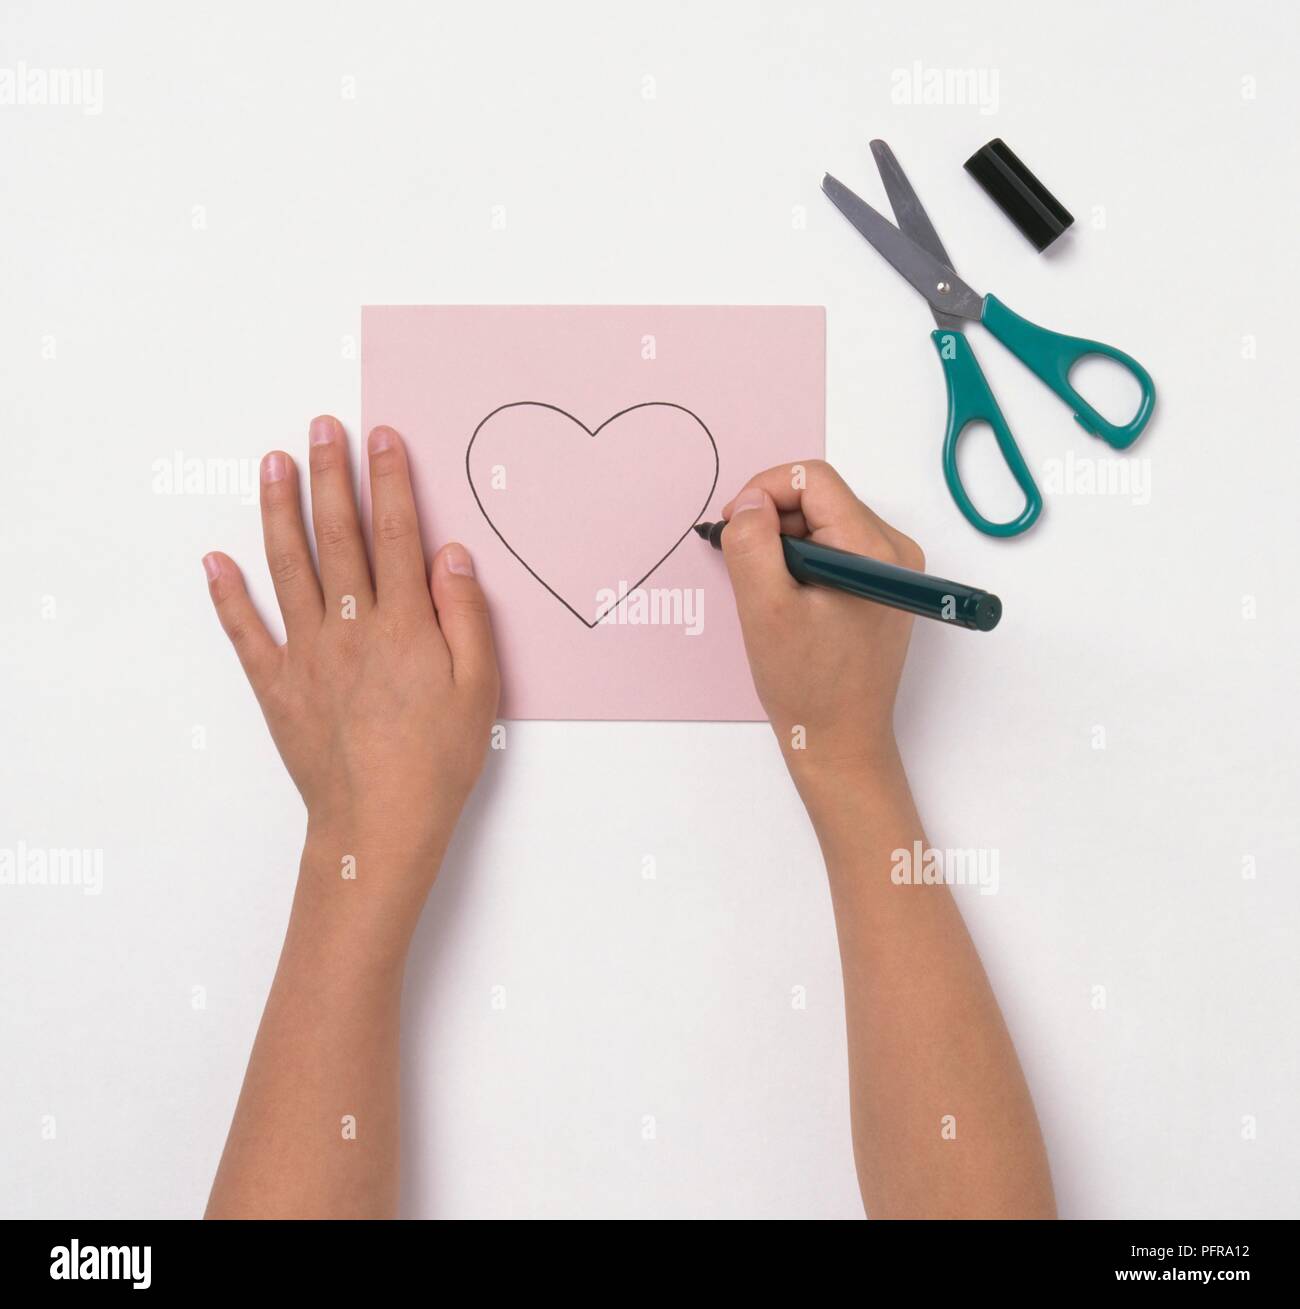 Girl using felt tip pen to draw heart shape on pink paper Stock Photo